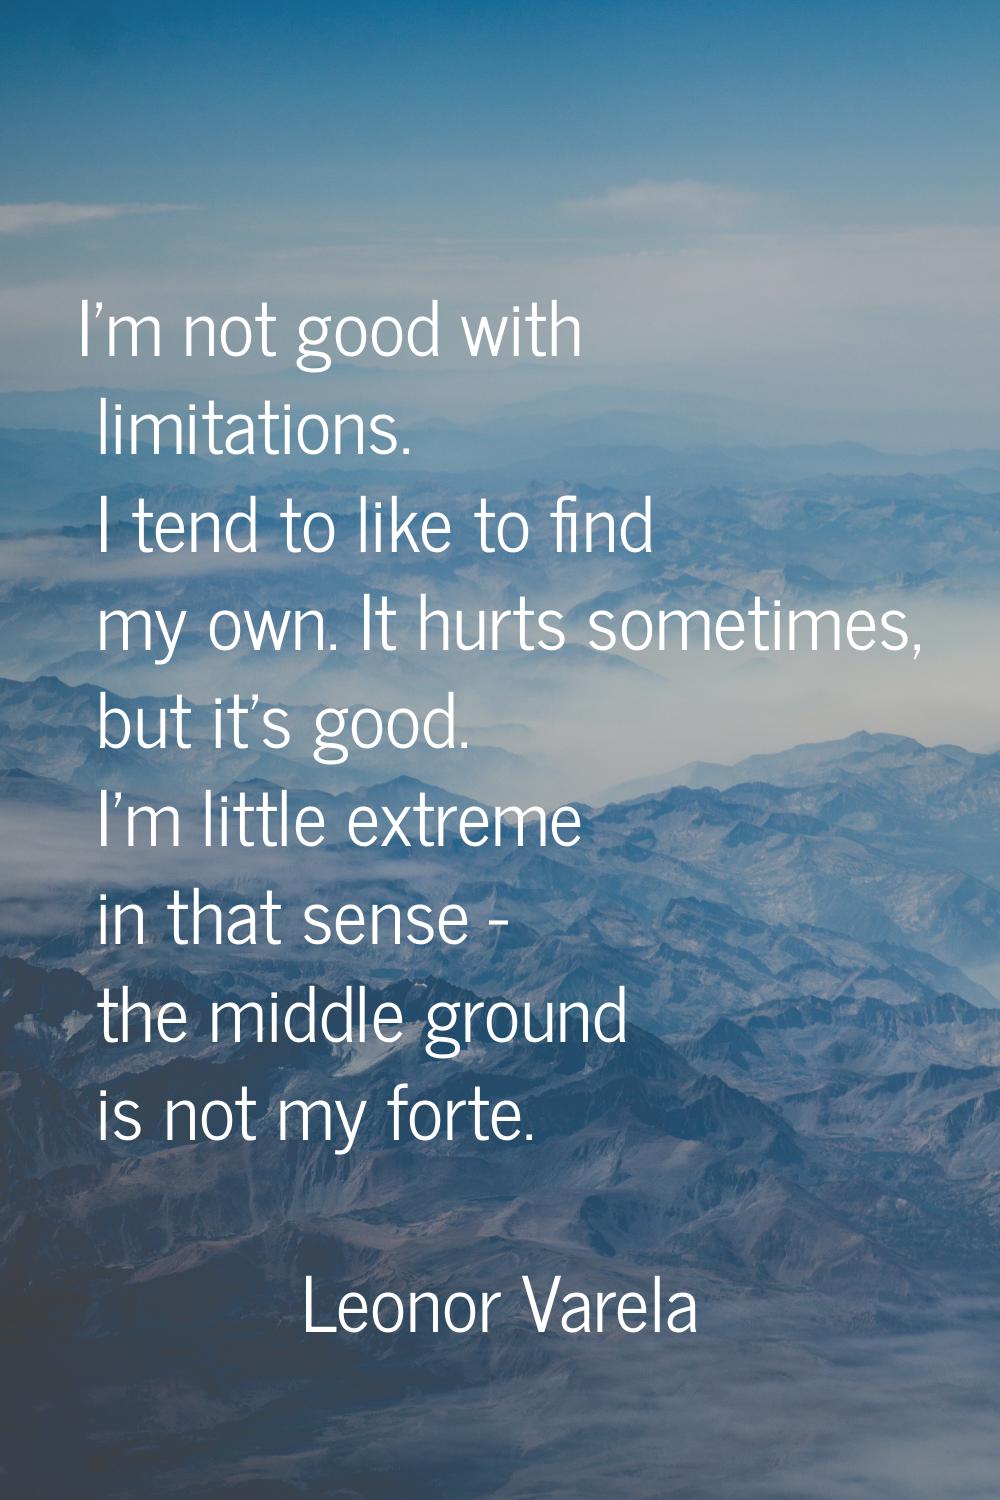 I'm not good with limitations. I tend to like to find my own. It hurts sometimes, but it's good. I'